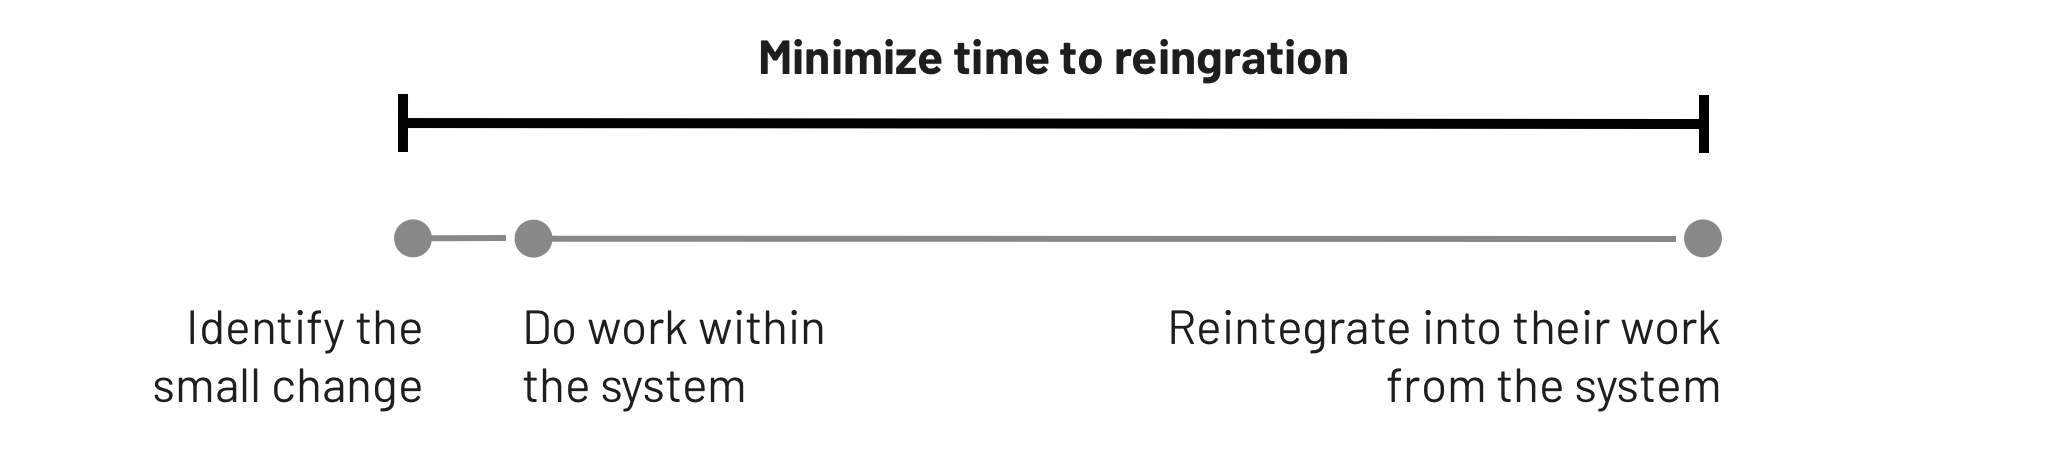 Diagram of timeline from identification to reintegration.